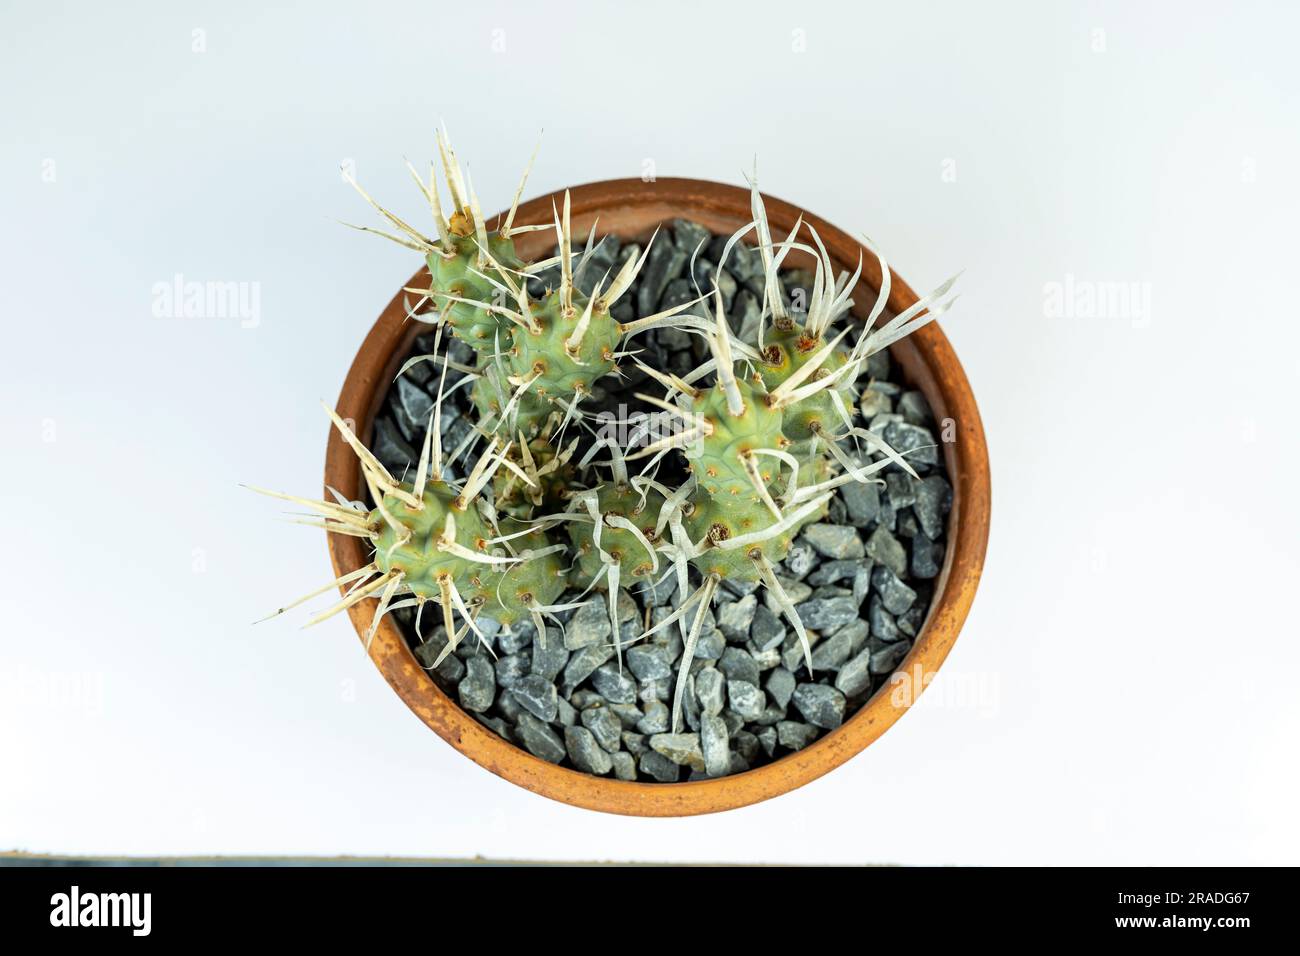 Tephrocactus articulatus paper spine cactus in a clay pot on white isolated background Stock Photo